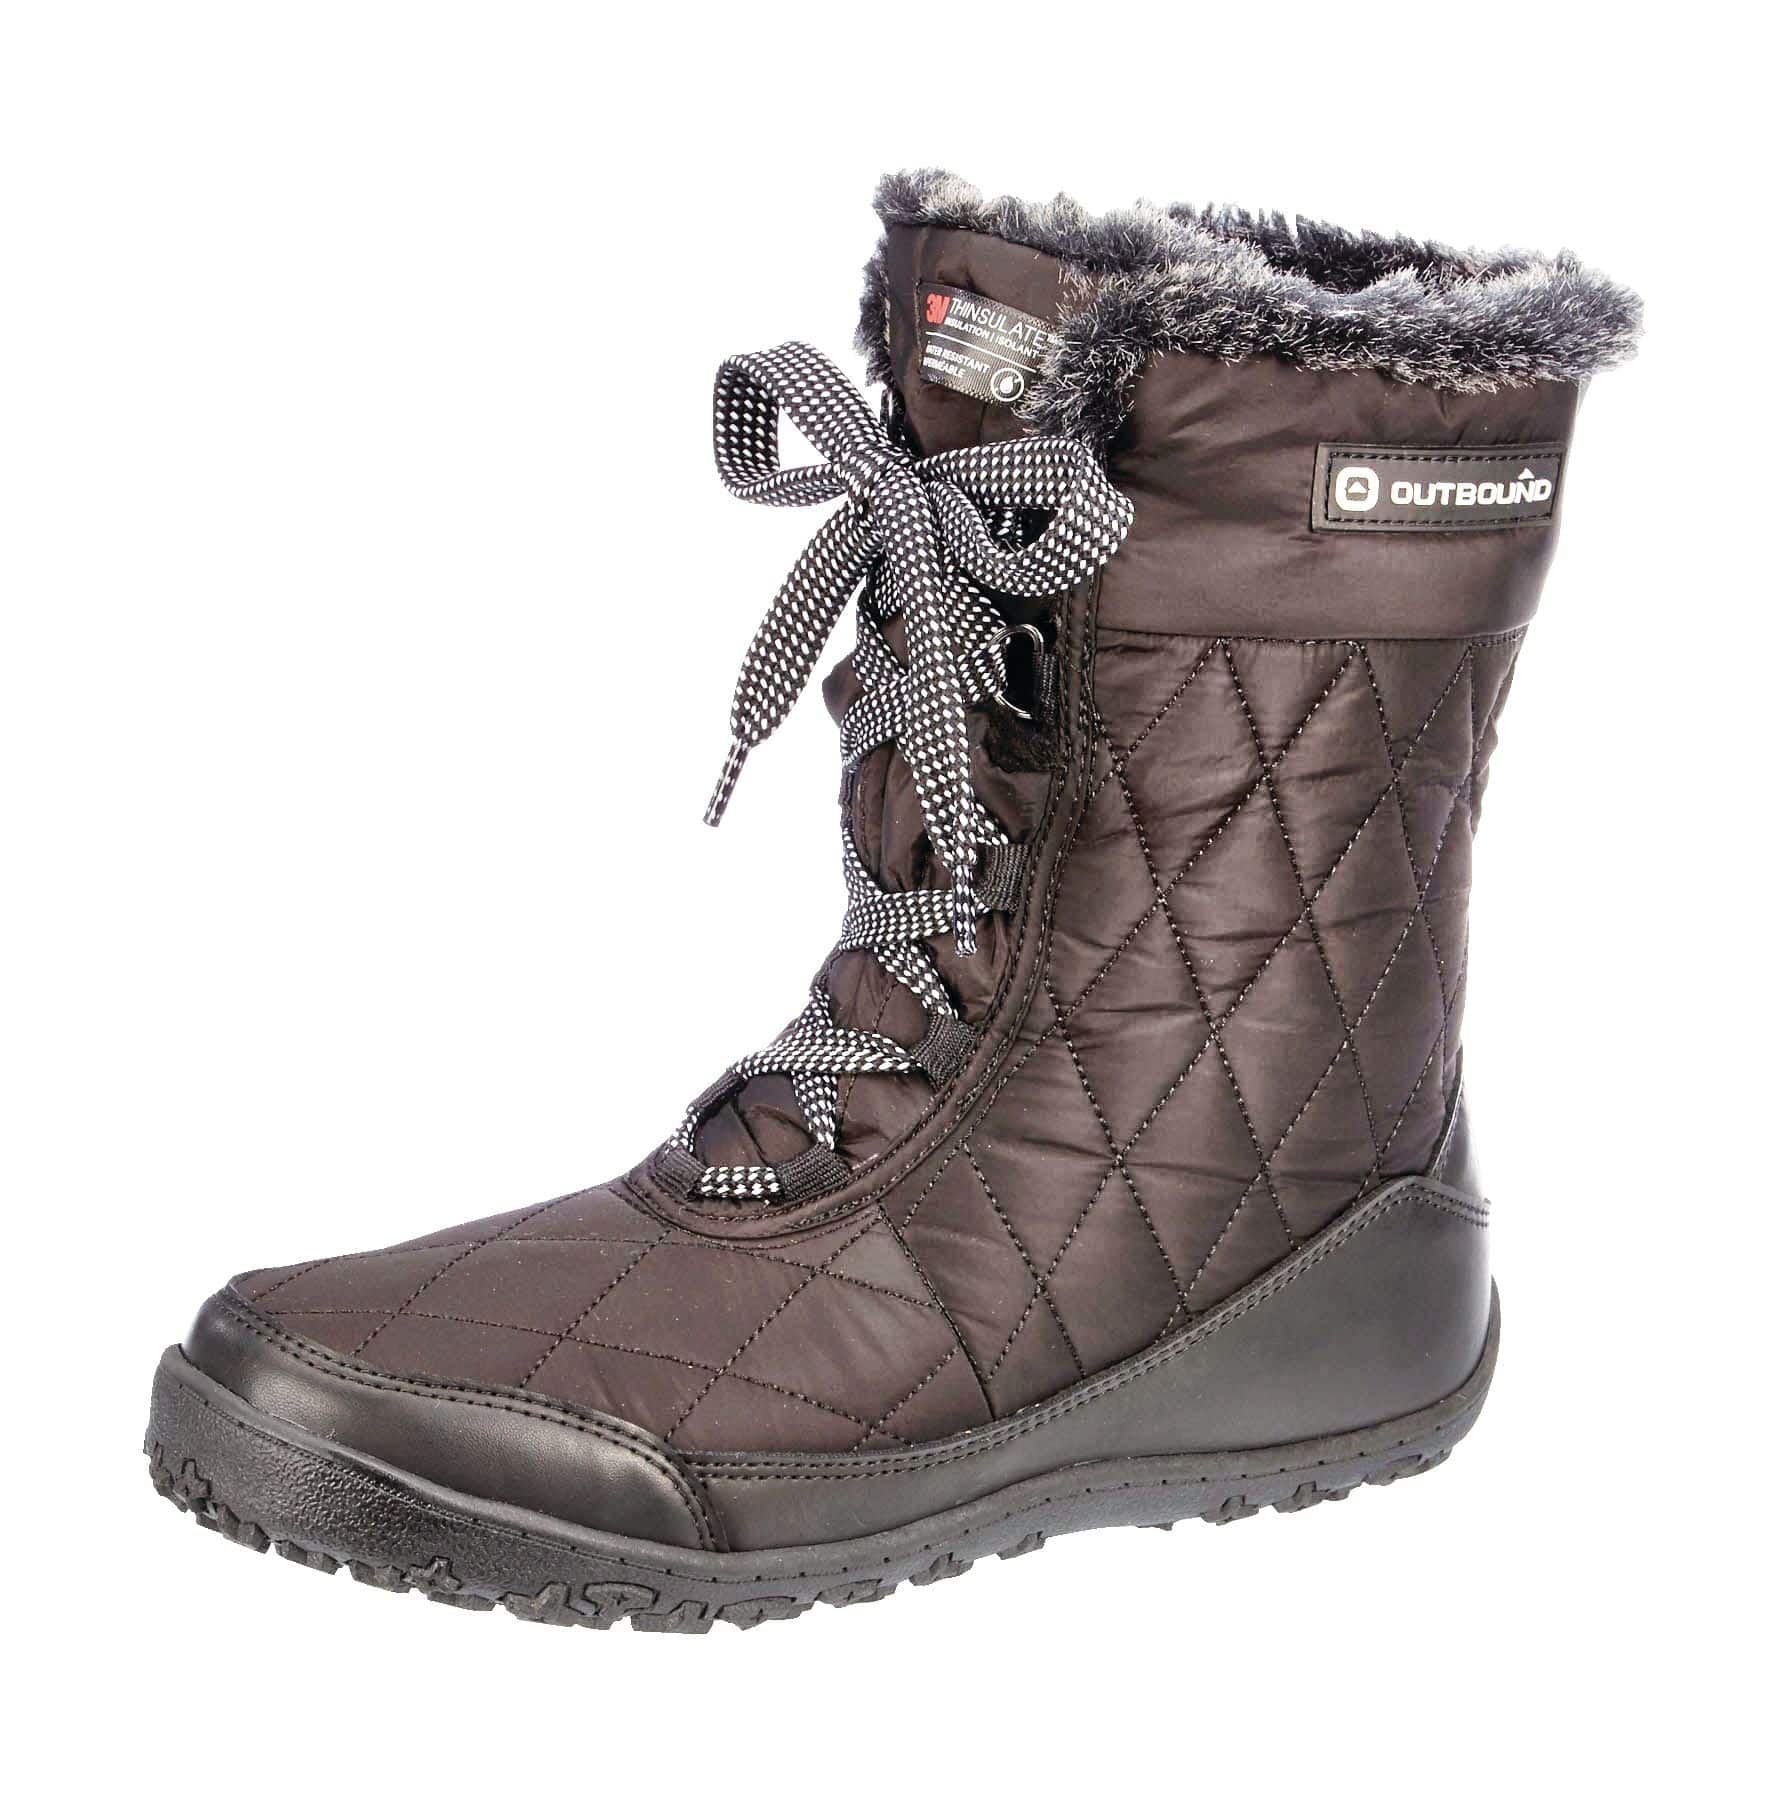 Outbound Women's Mariana Winter Boots